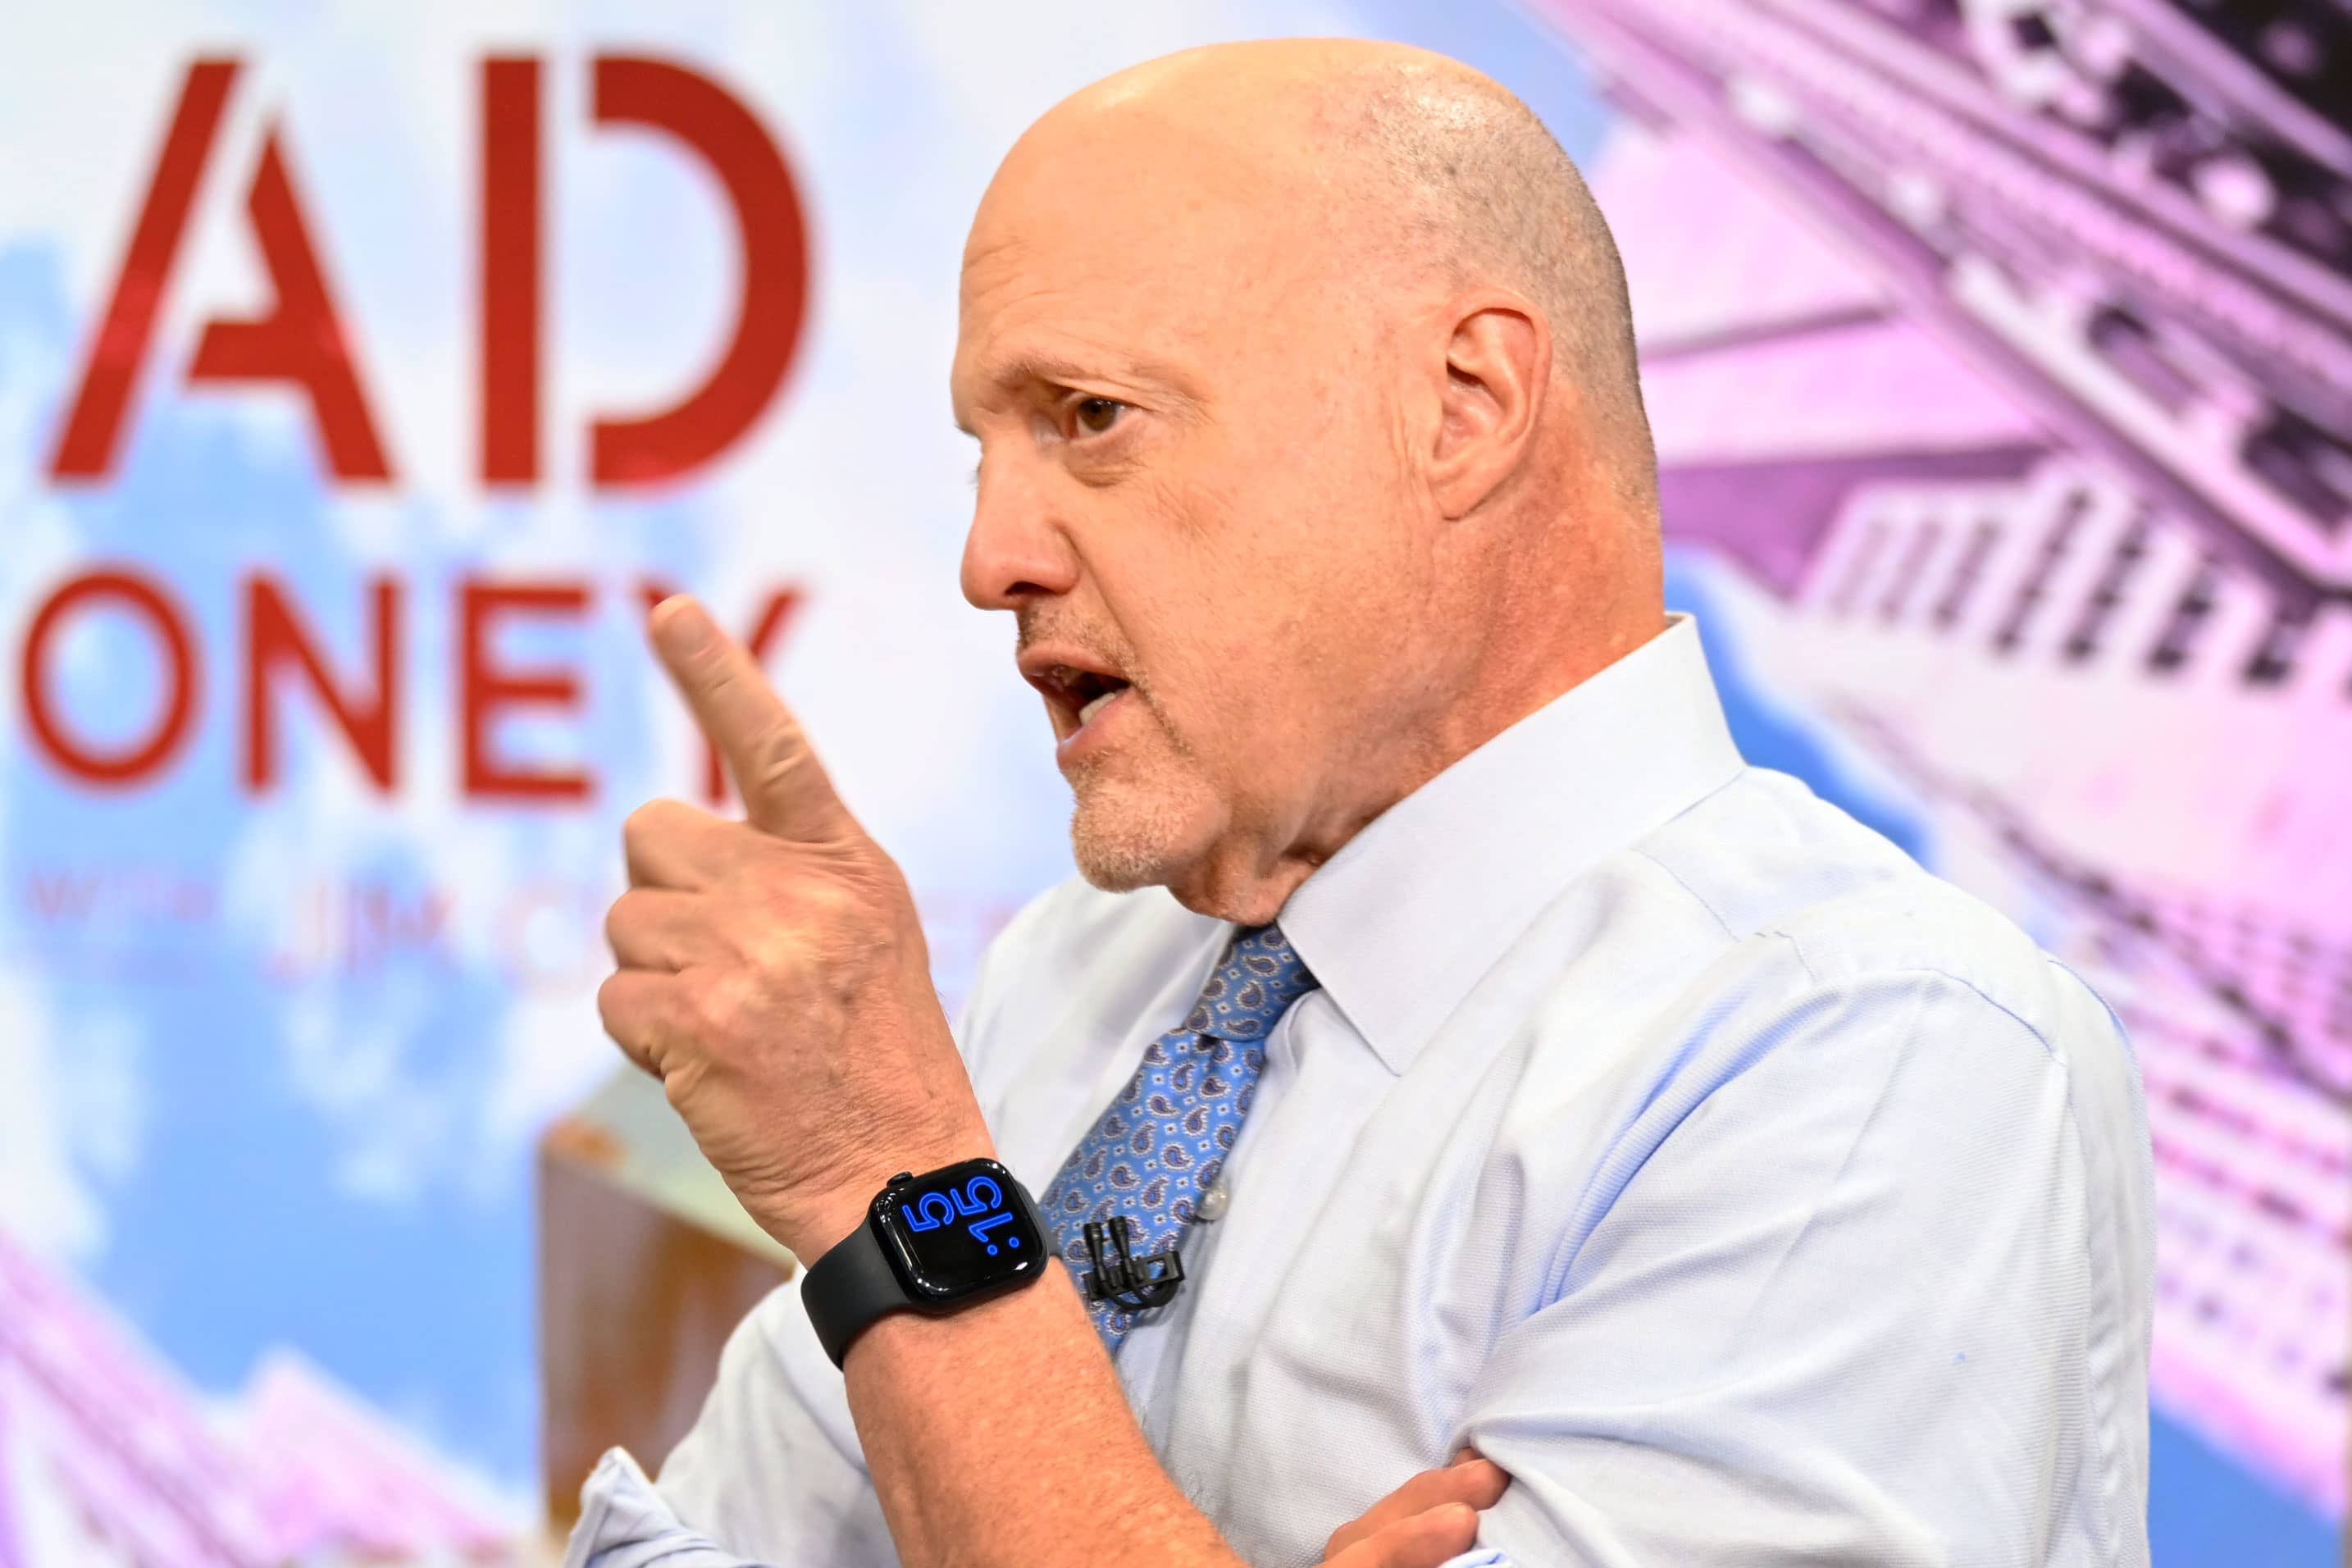 'Brace yourself, don't invest too much money' - why Cramer is growing worried about the market